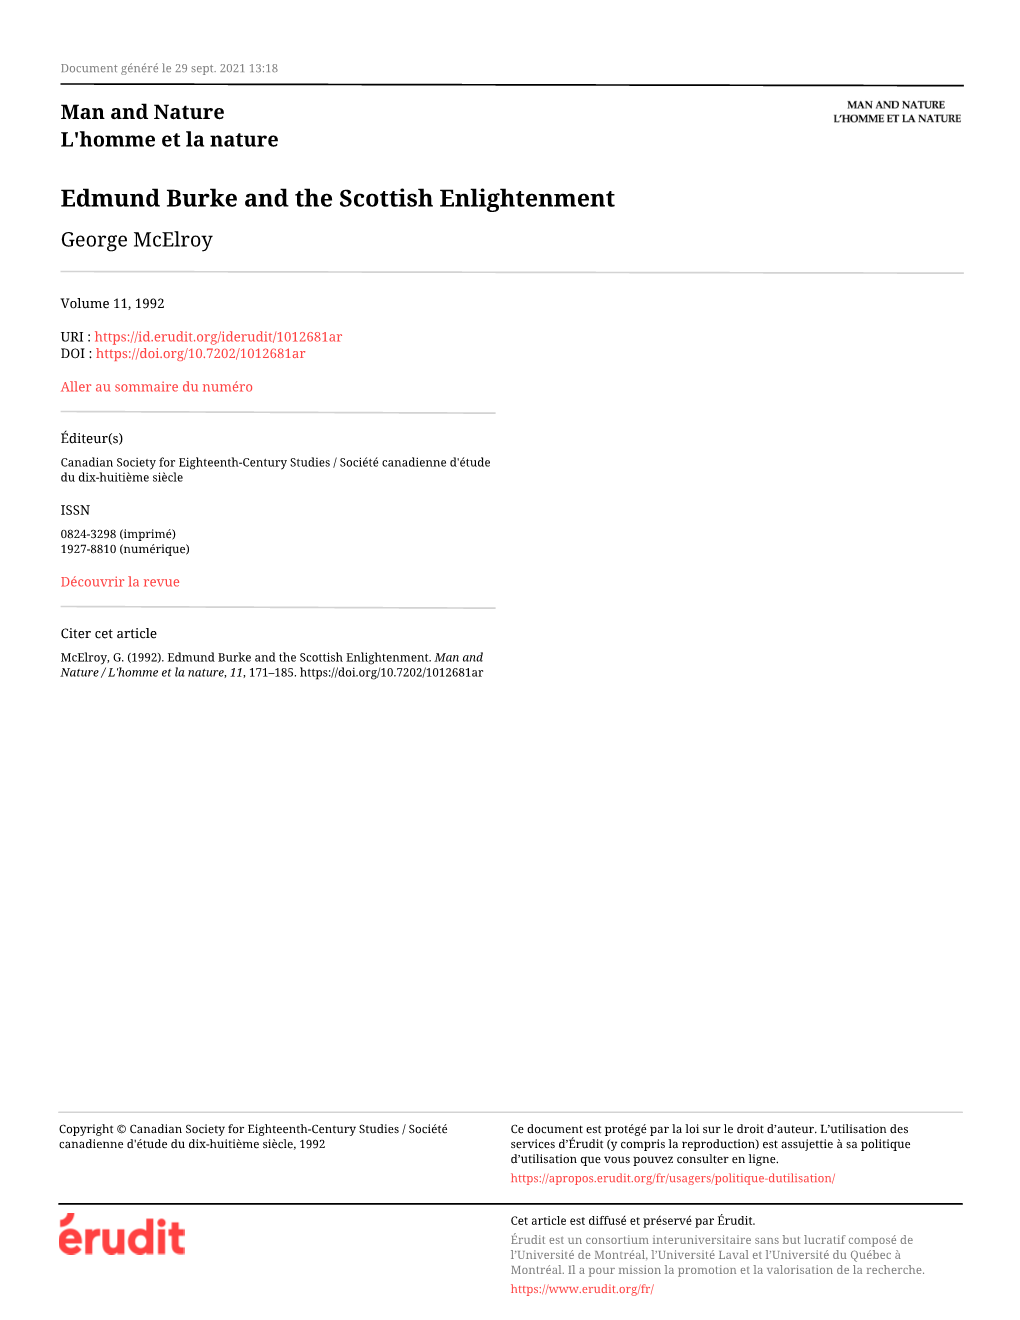 Edmund Burke and the Scottish Enlightenment George Mcelroy